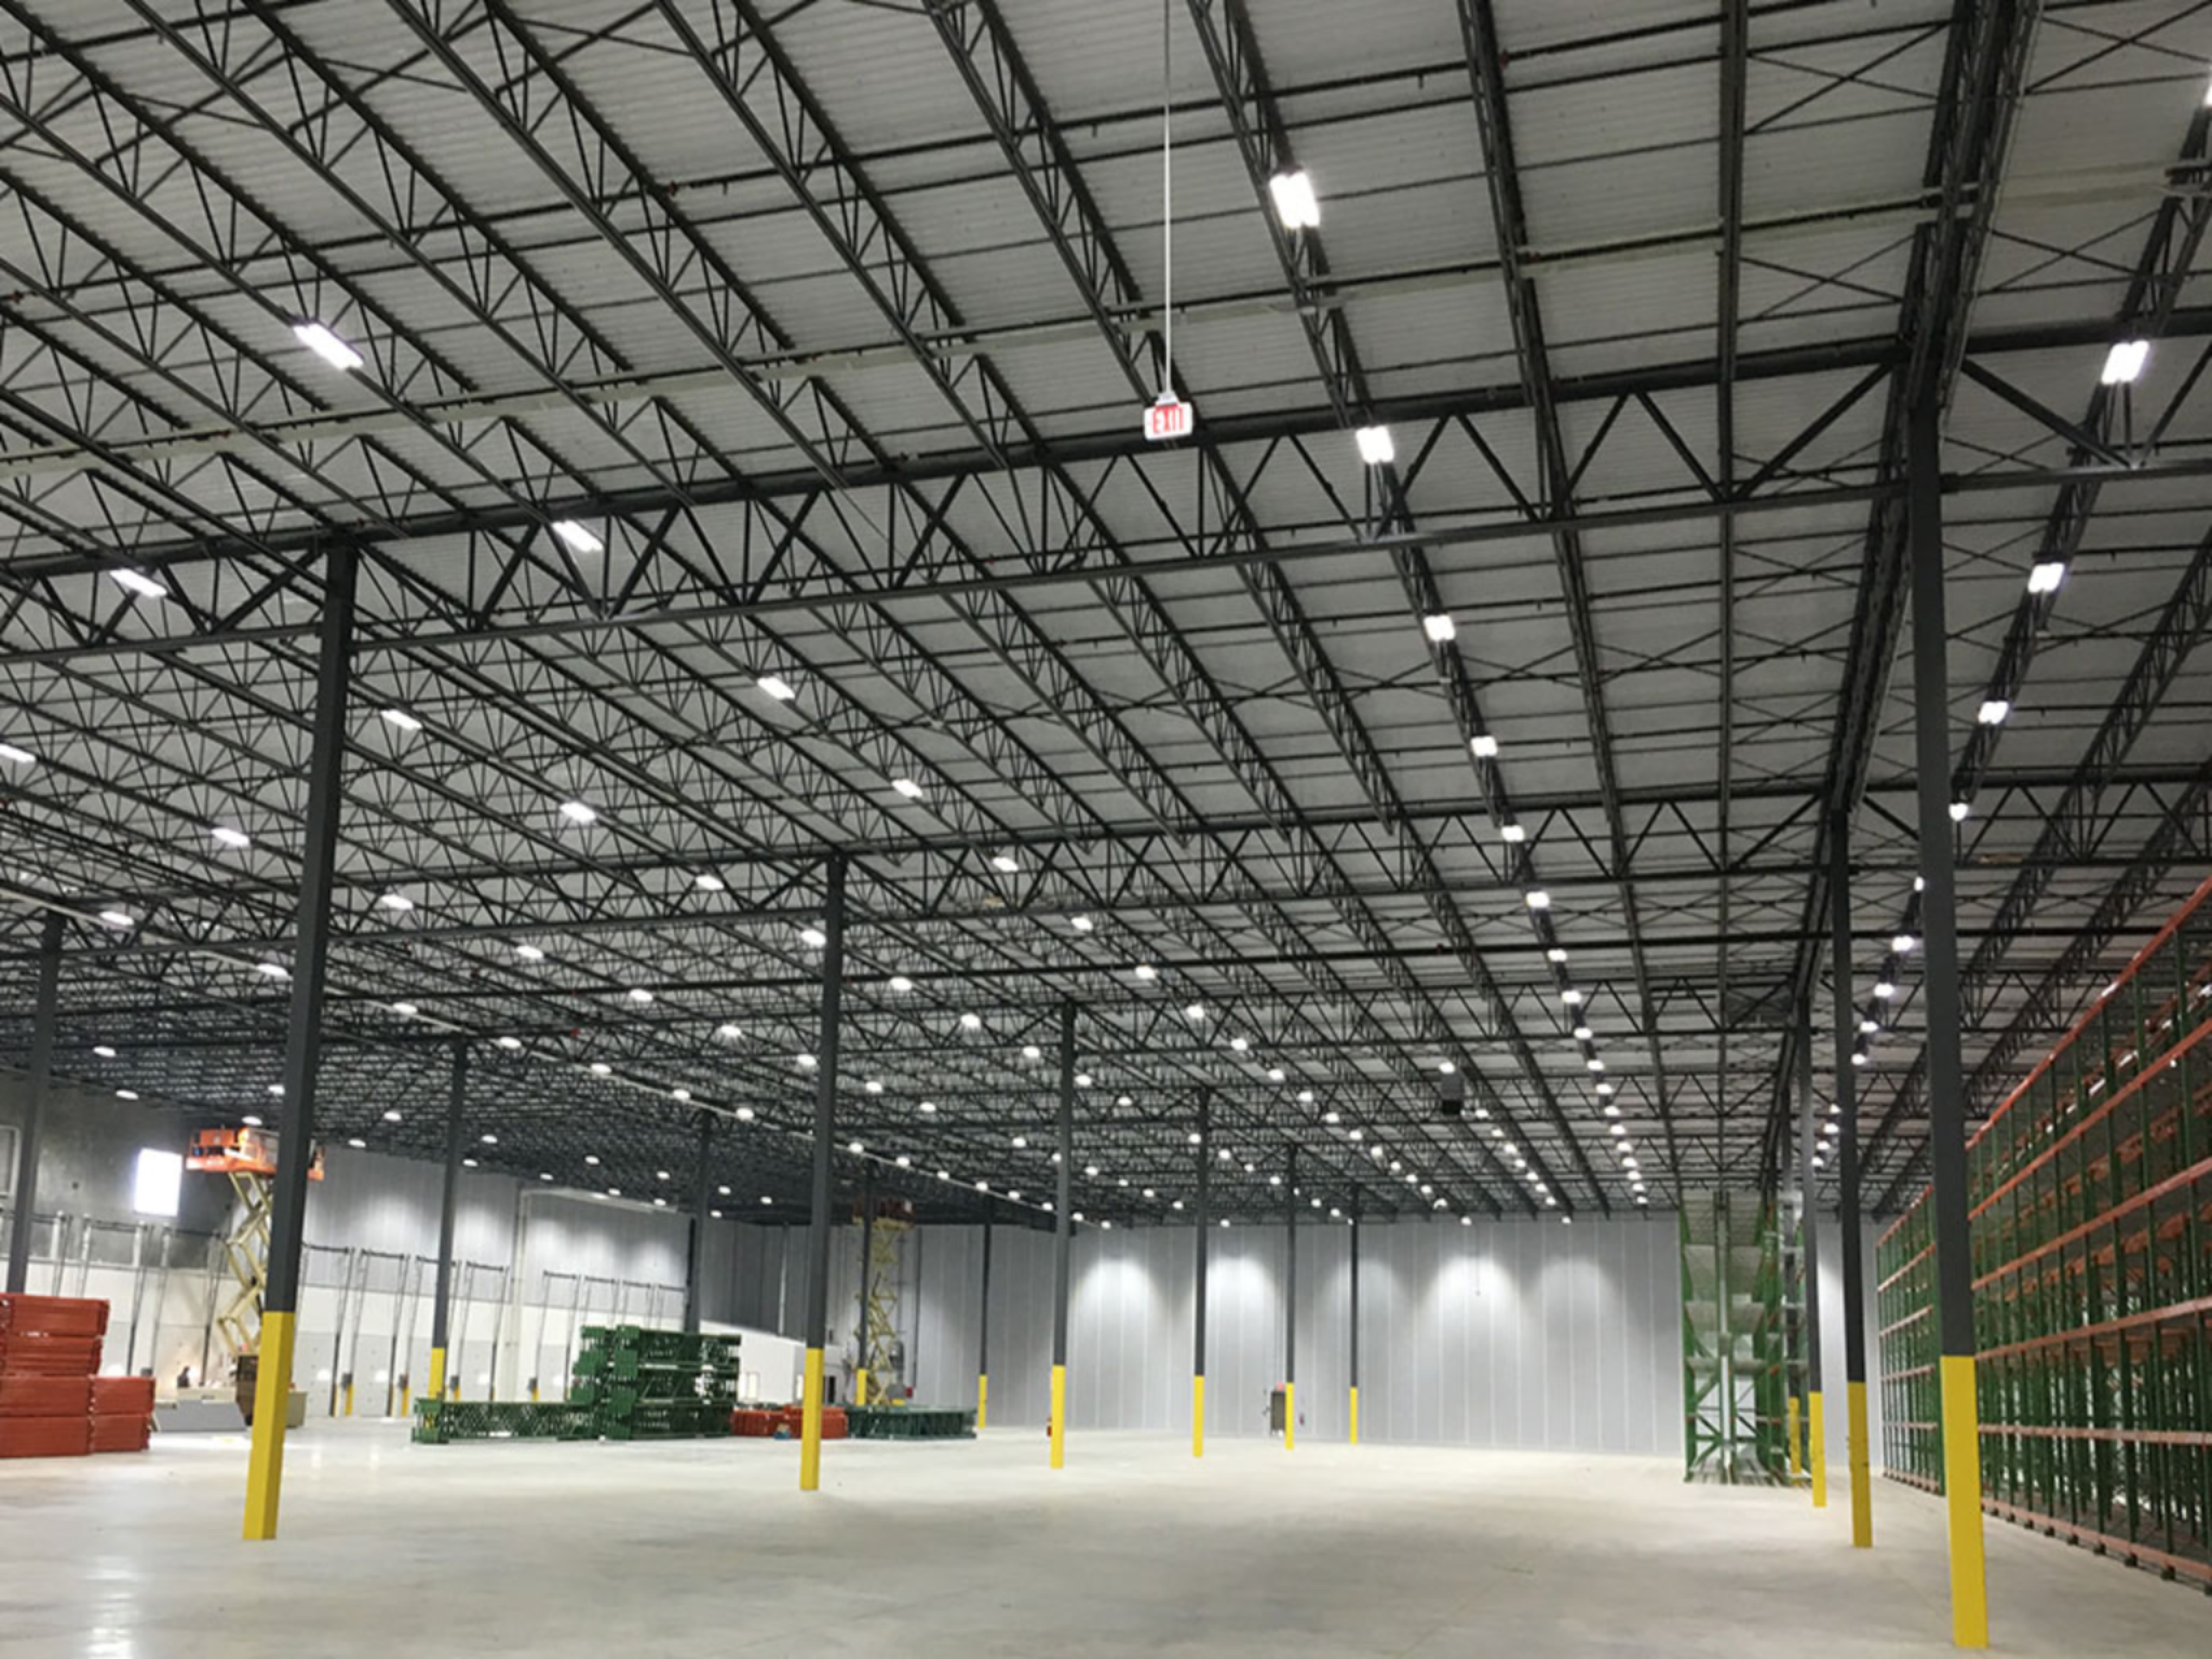 Electrical Lighting | Guide to the Best Warehouse Light Fixtures and Why Your Business Needs LED Warehouse Warehouse-Lighting.com